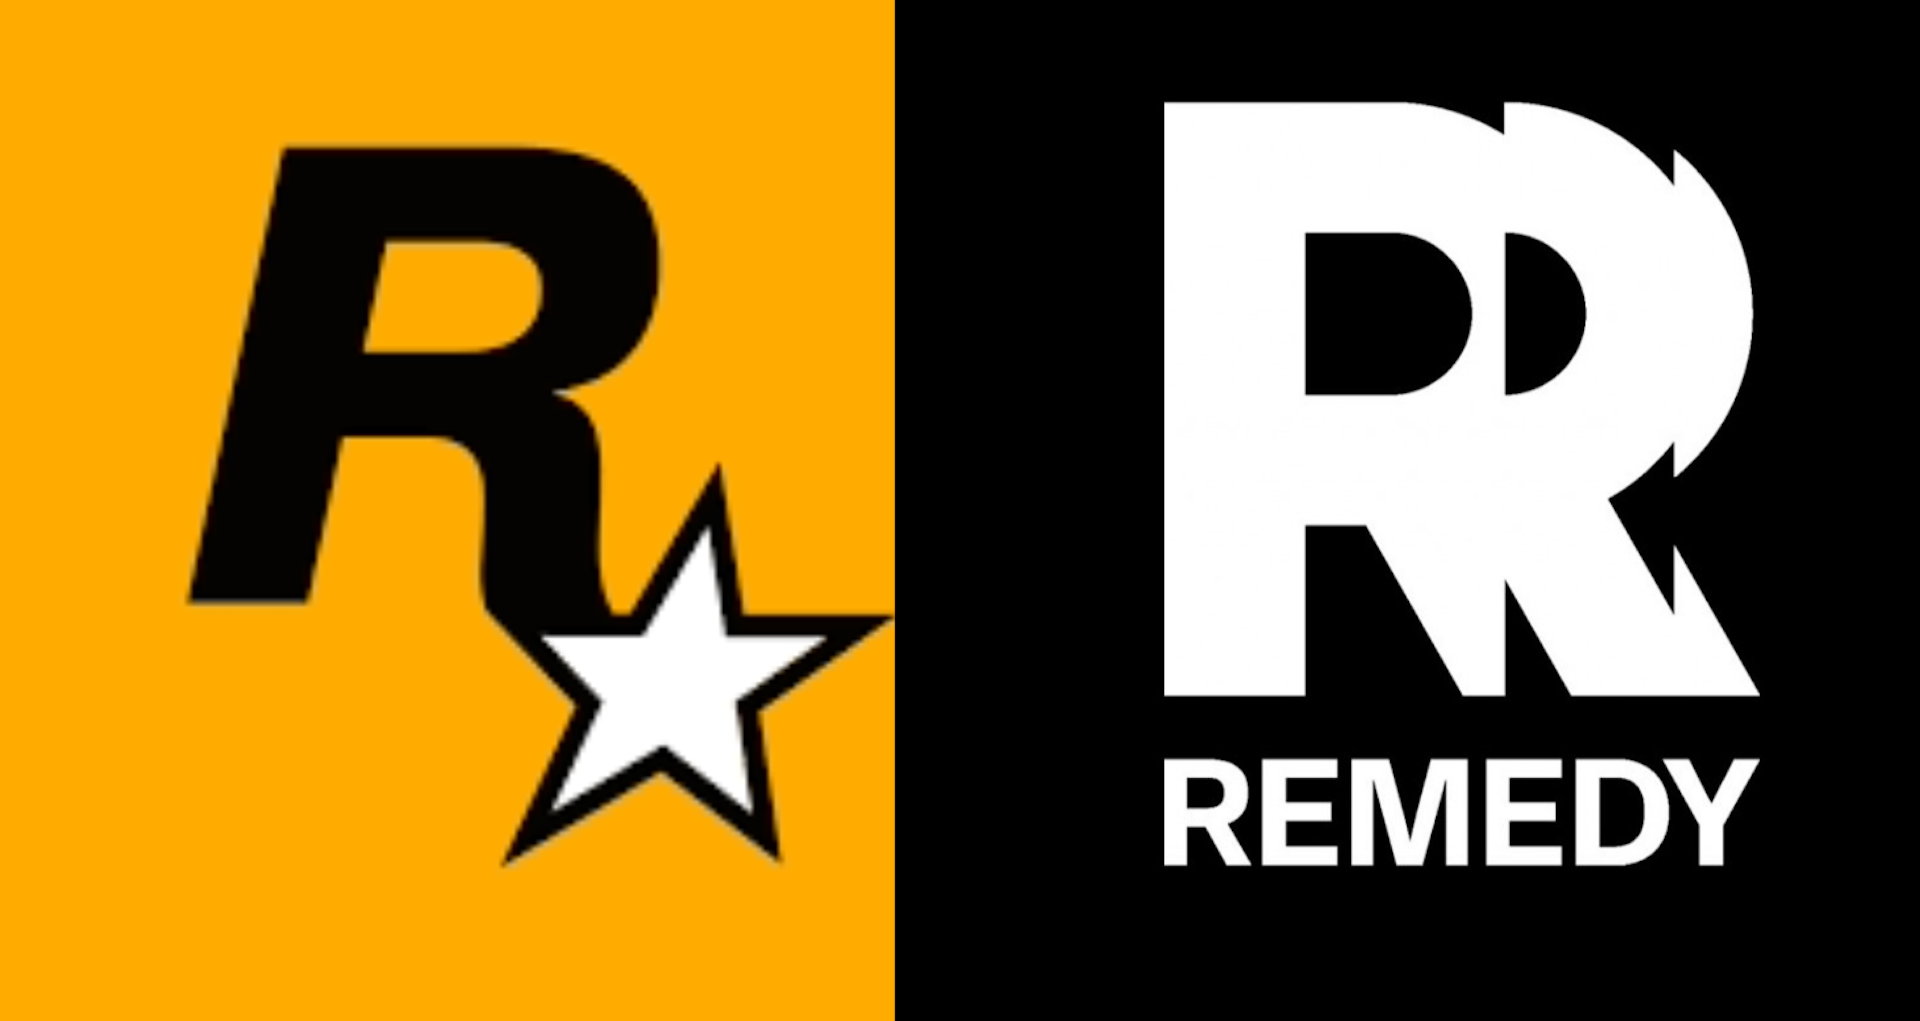 On the left, Rockstar Games' logo: a black R with a white star at the bottom, on a yellow background. On the right, Remedy Entertainment's logo: several overlapping white "R"s over the word "Remedy" on a black background